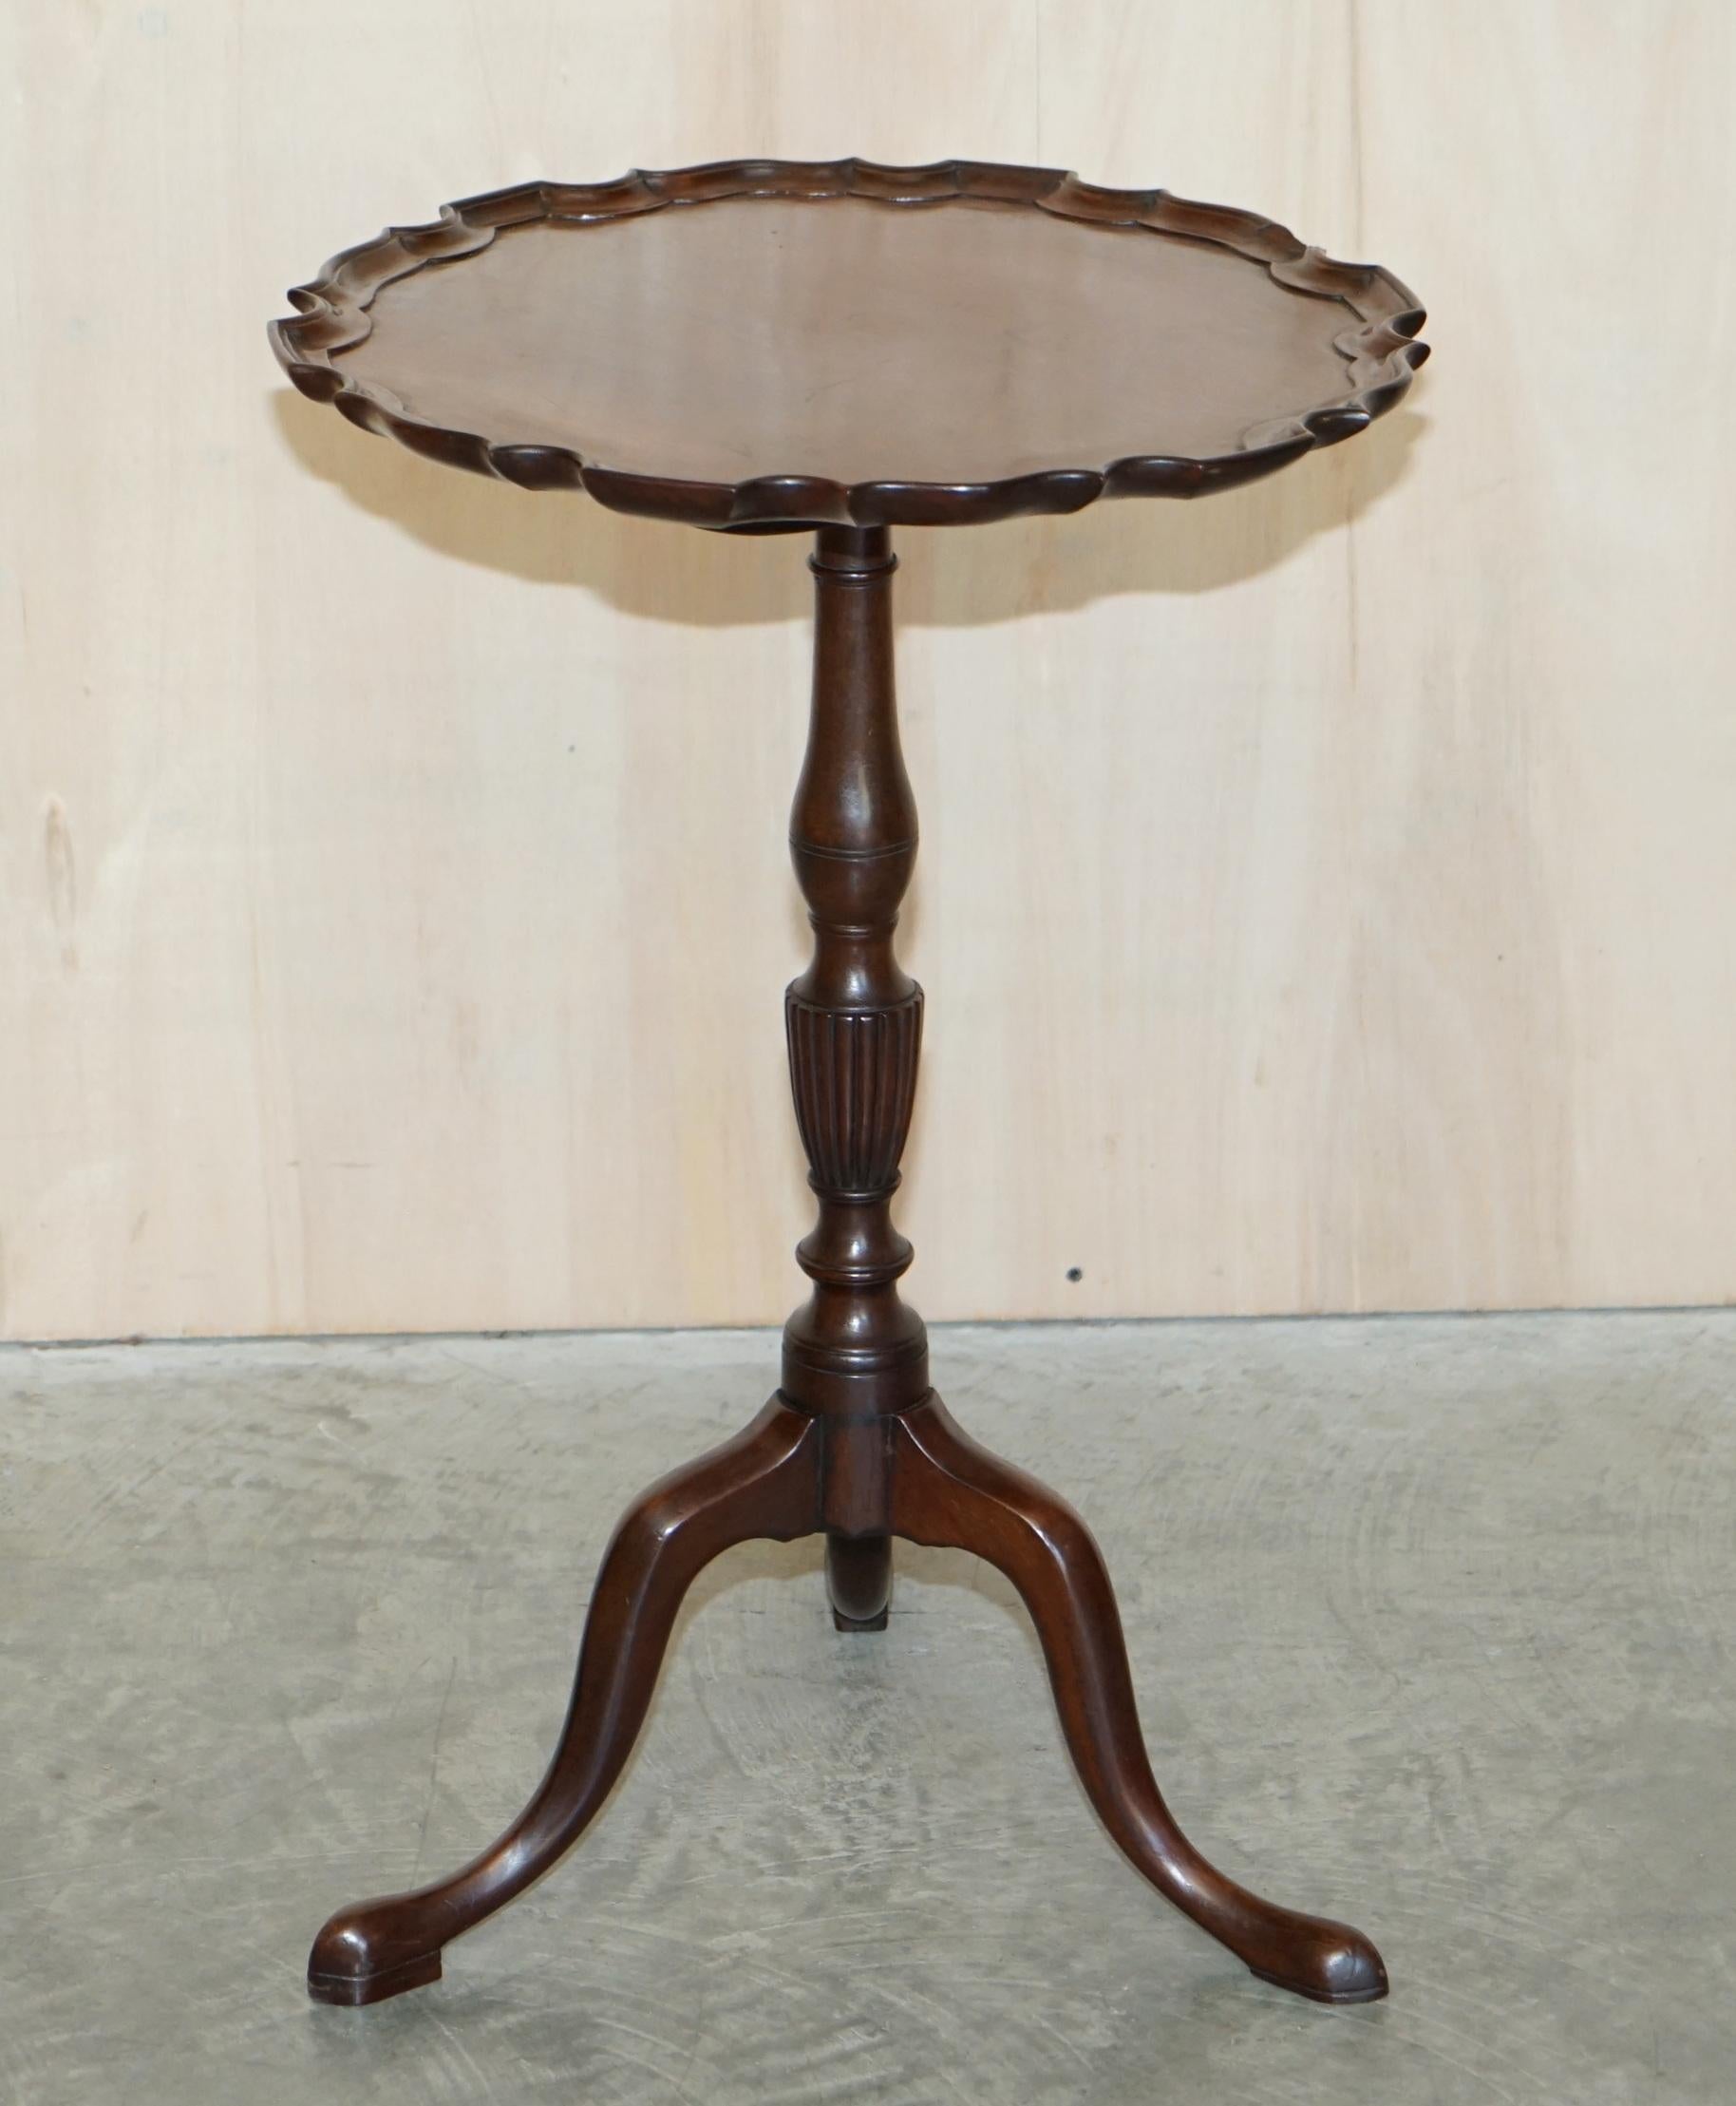 We are delighted to offer for sale this very fine antique mahogany pie crust edge tripod table after the original by Gillow's of Lancaster 

A very good looking well made and decorative piece, it sits beautifully in any setting and is very